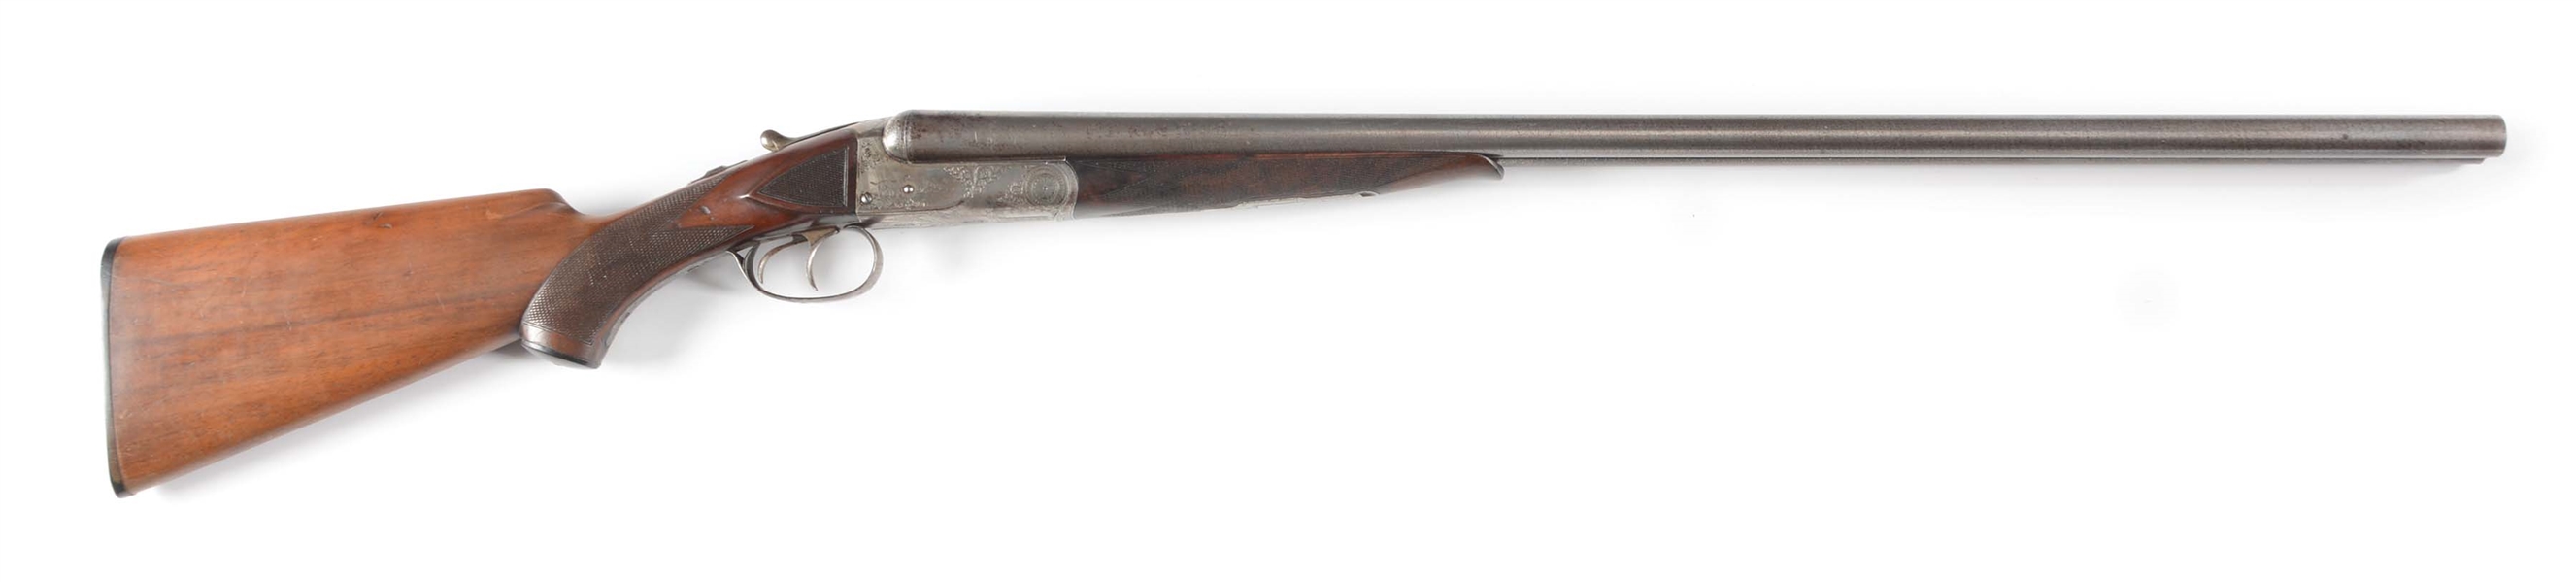 (A) COLT MODEL 1883 HAMMERLESS SHOTGUN WITH FINE SCROLL AND DOG SCENE ENGRAVING.